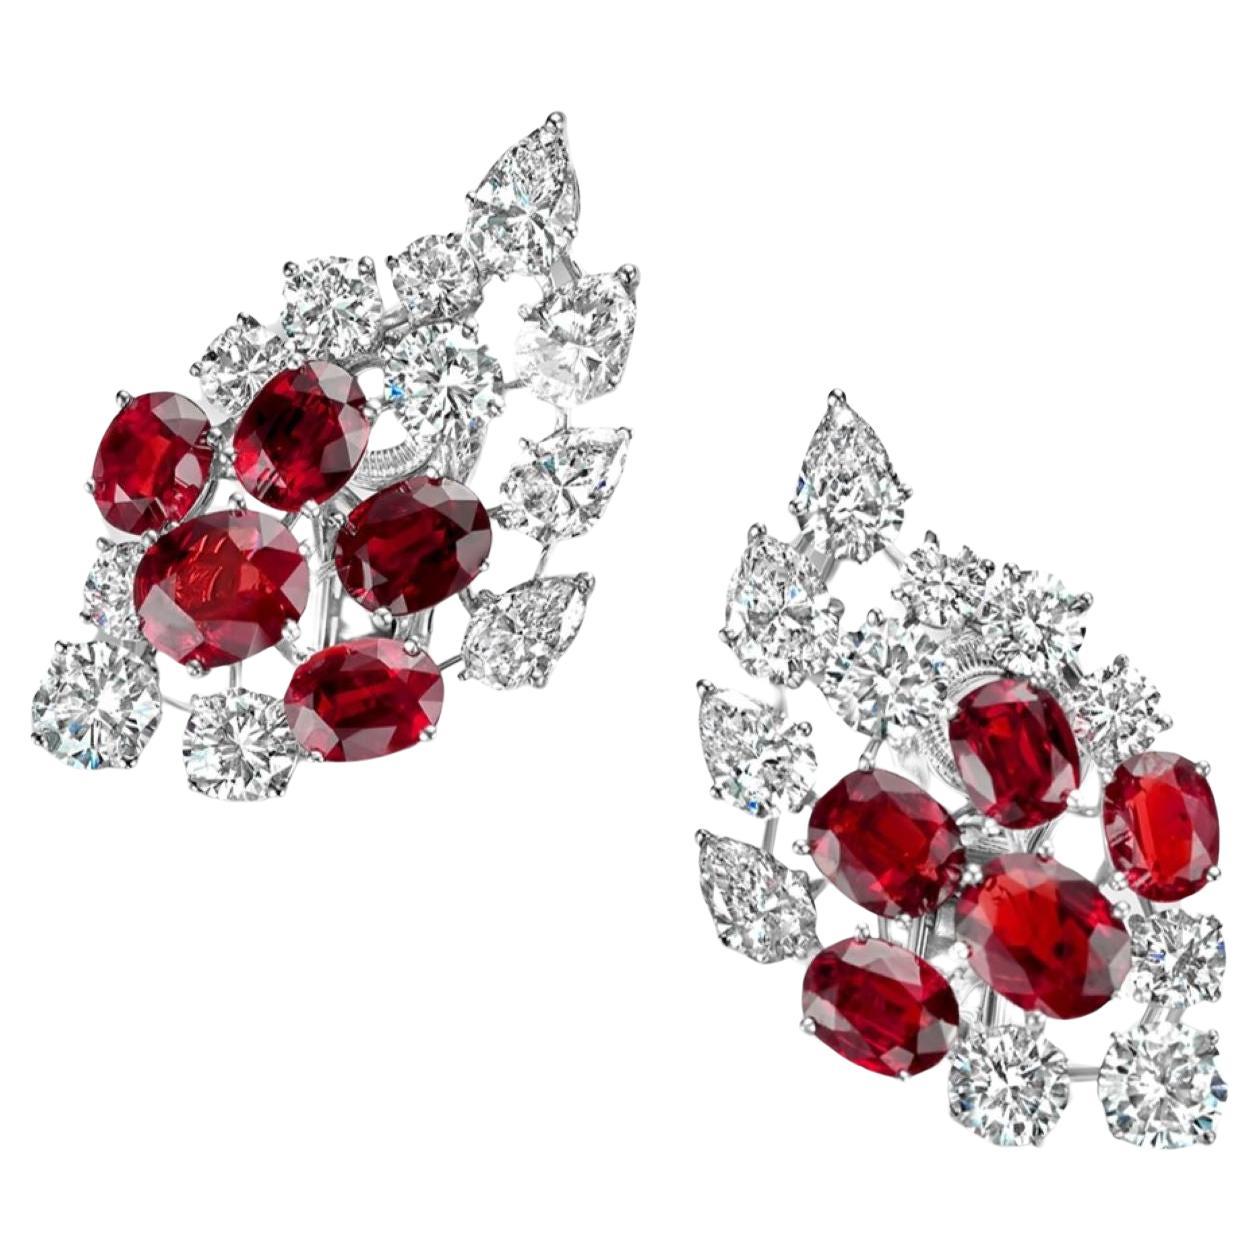 Platinum Clip-On Earrings 7ct Rubies CGL Certified, 6.8ct Diamonds, Estate Oman For Sale